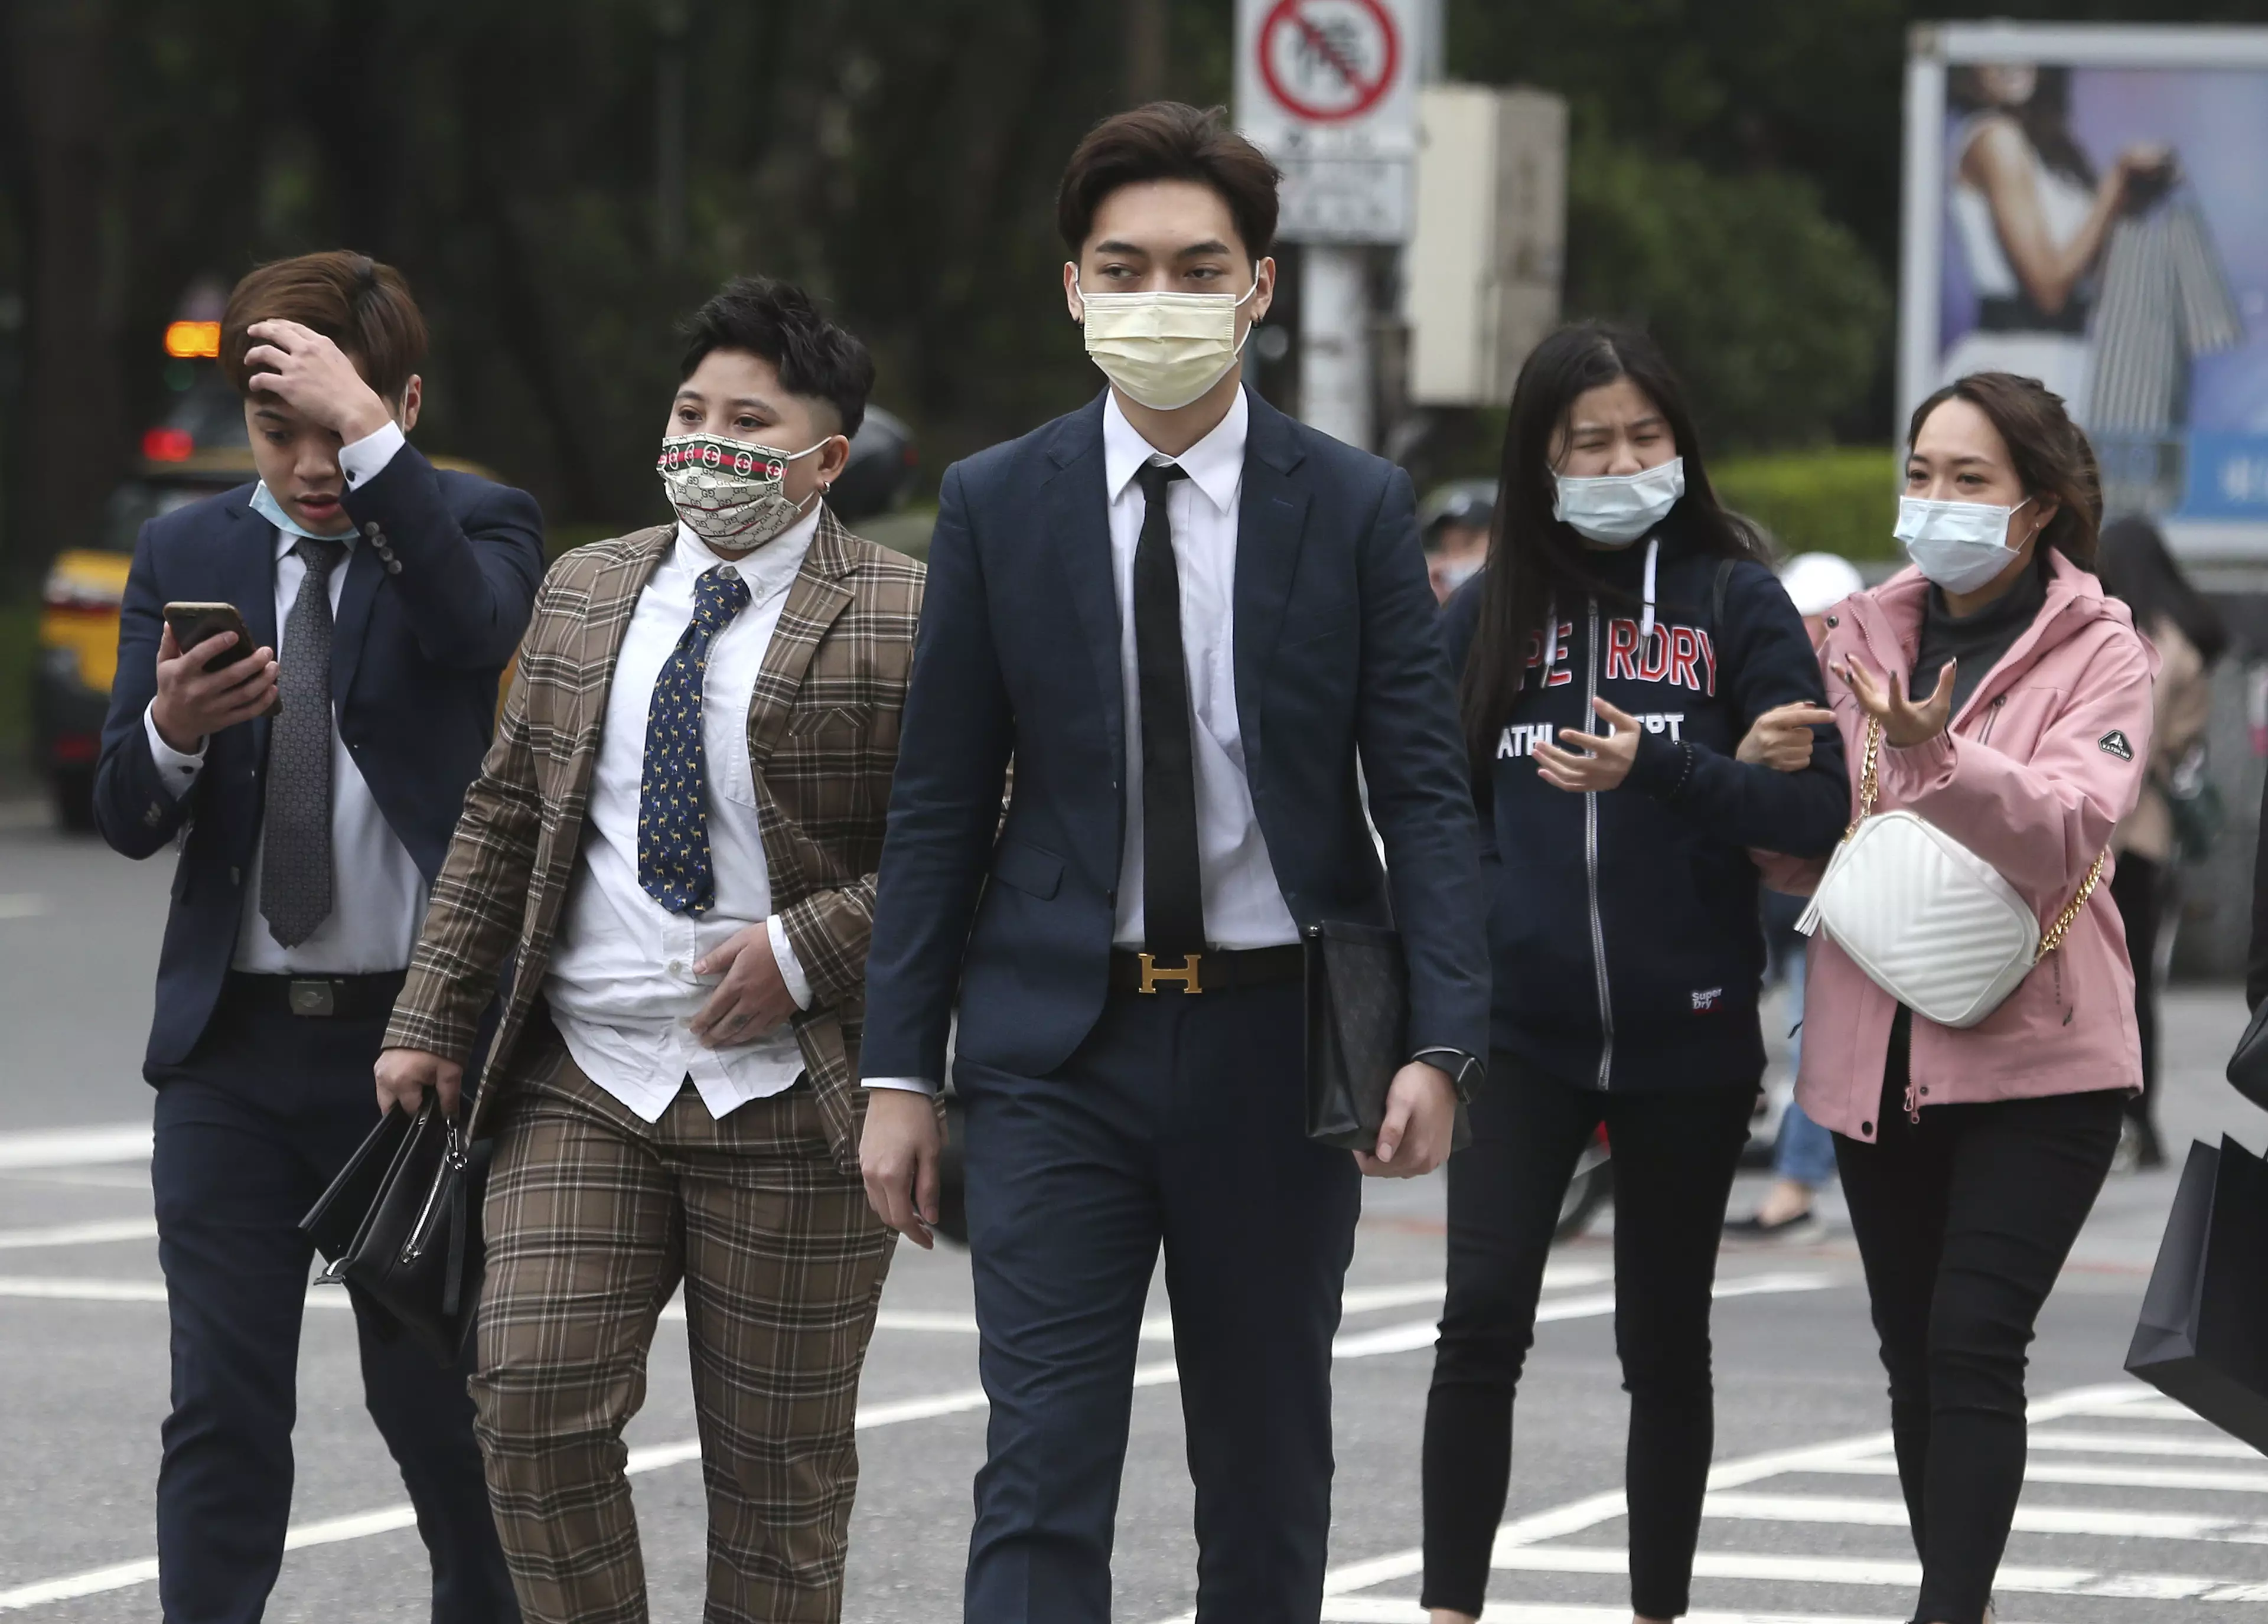 People wearing face coverings to curb the spread of Covid-19 in Taipei, Taiwan.